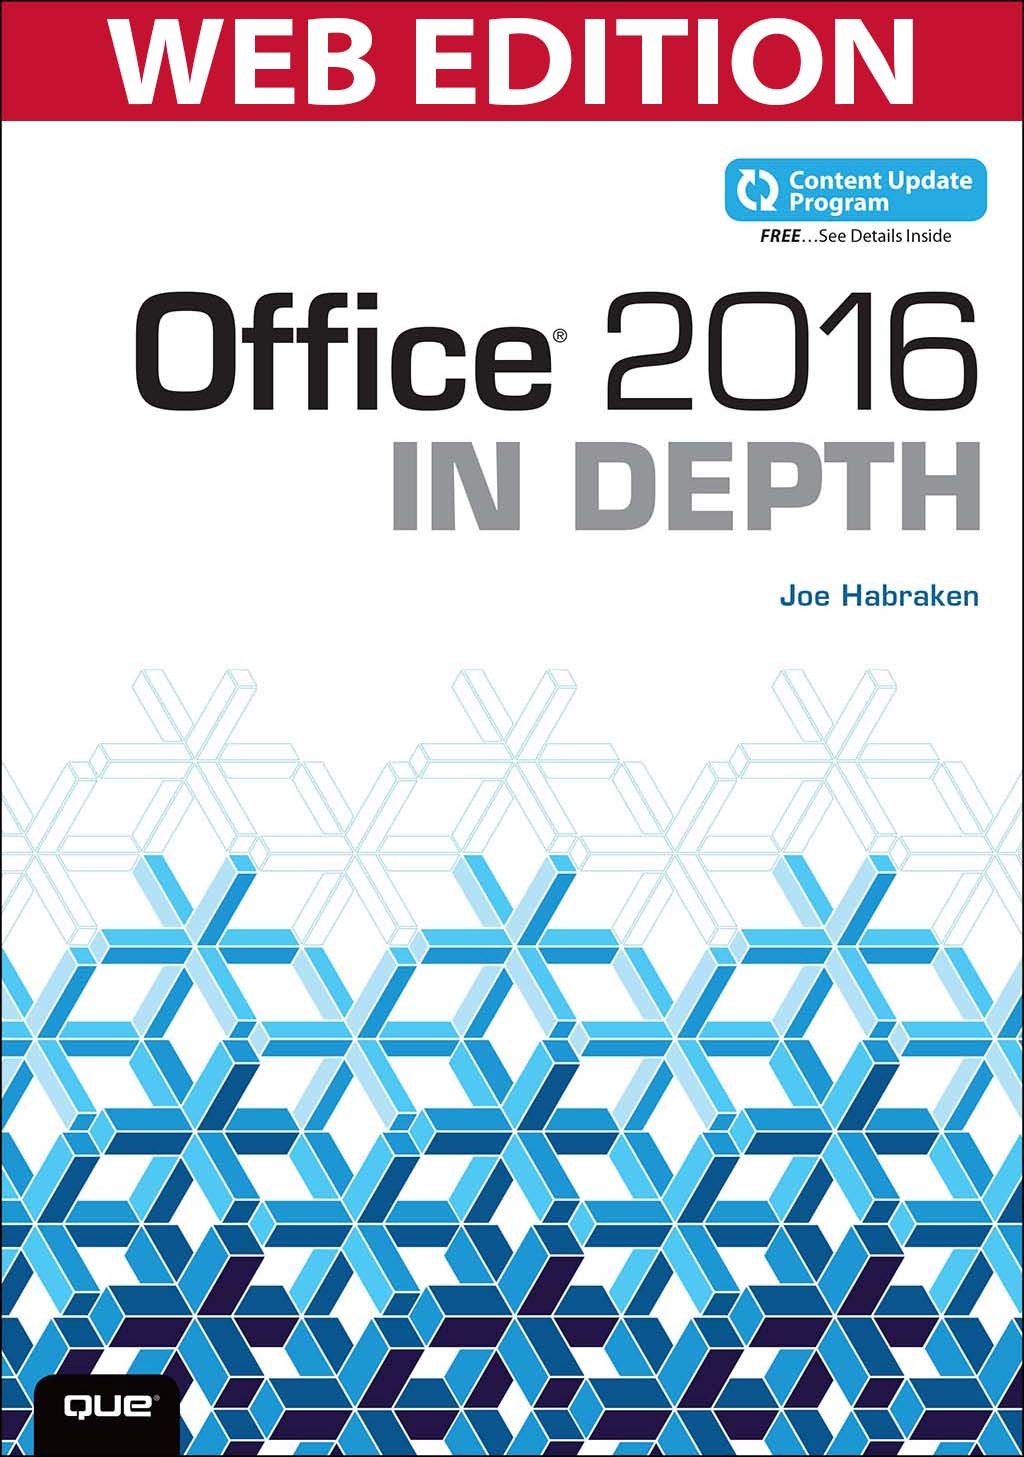 Office 2016 In Depth, (Web Edition and Content Update Program)